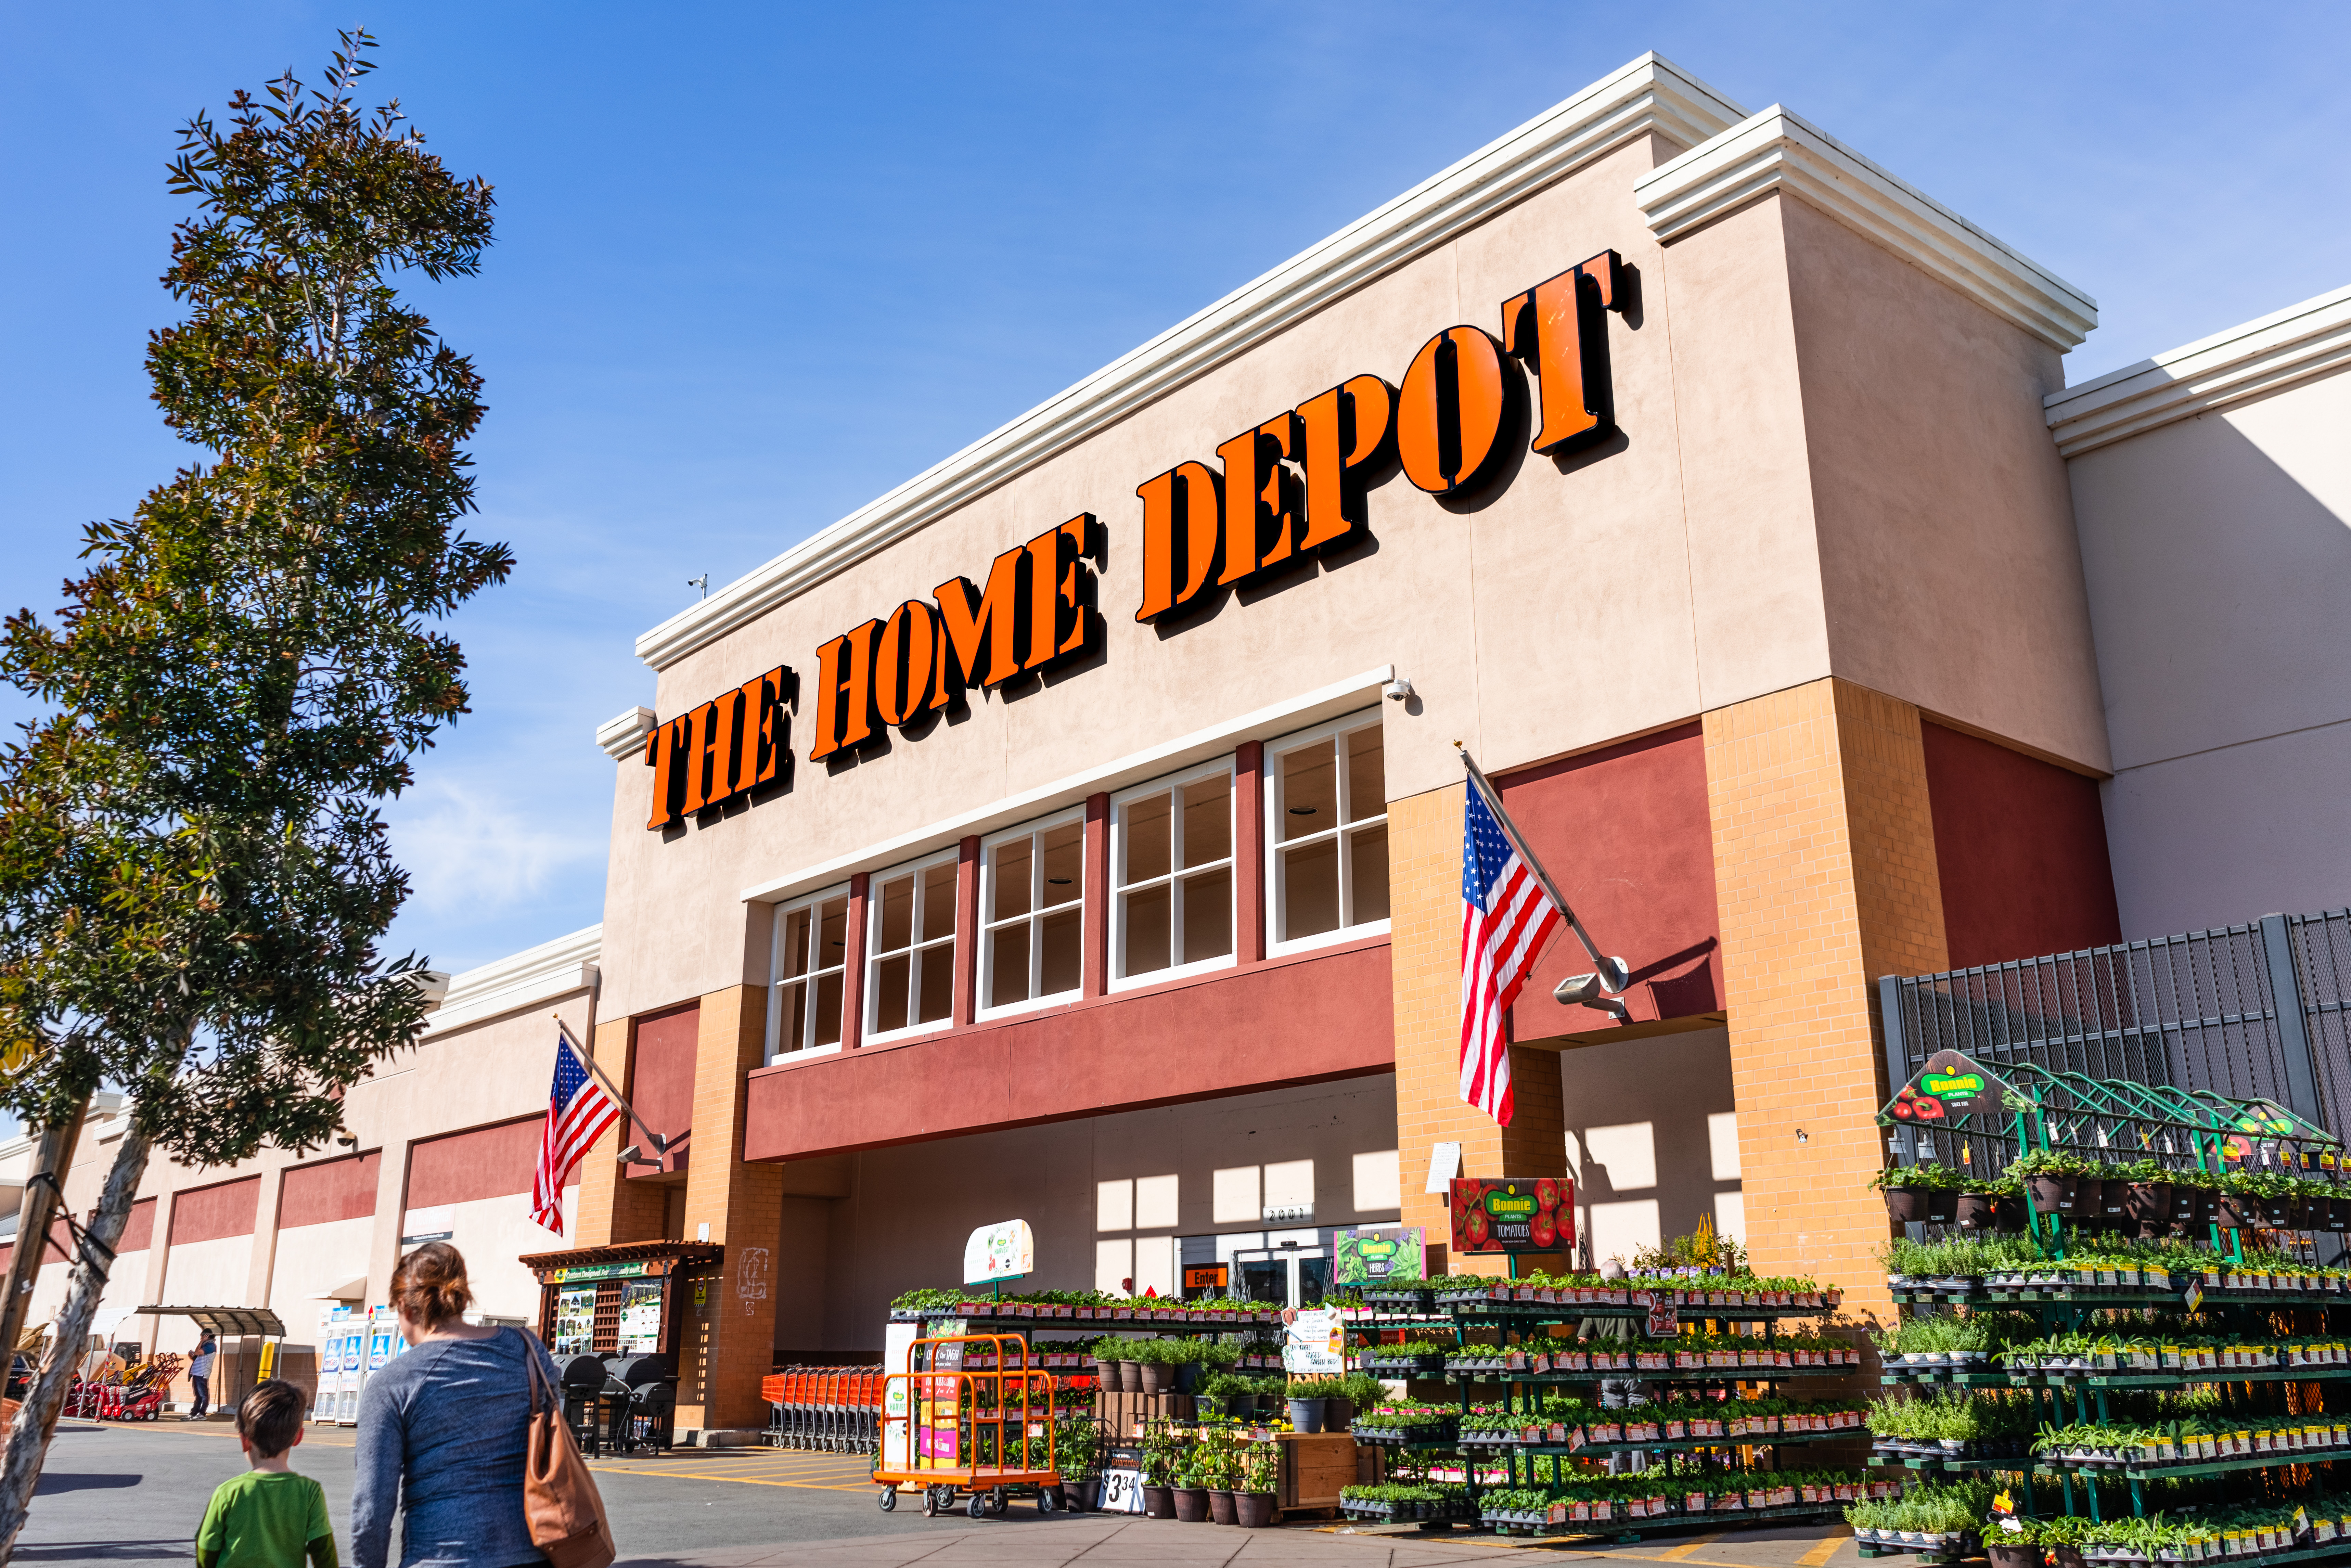 Home Depot's 'One Supply Chain' is taking shape with massive 2021 growth -  FreightWaves